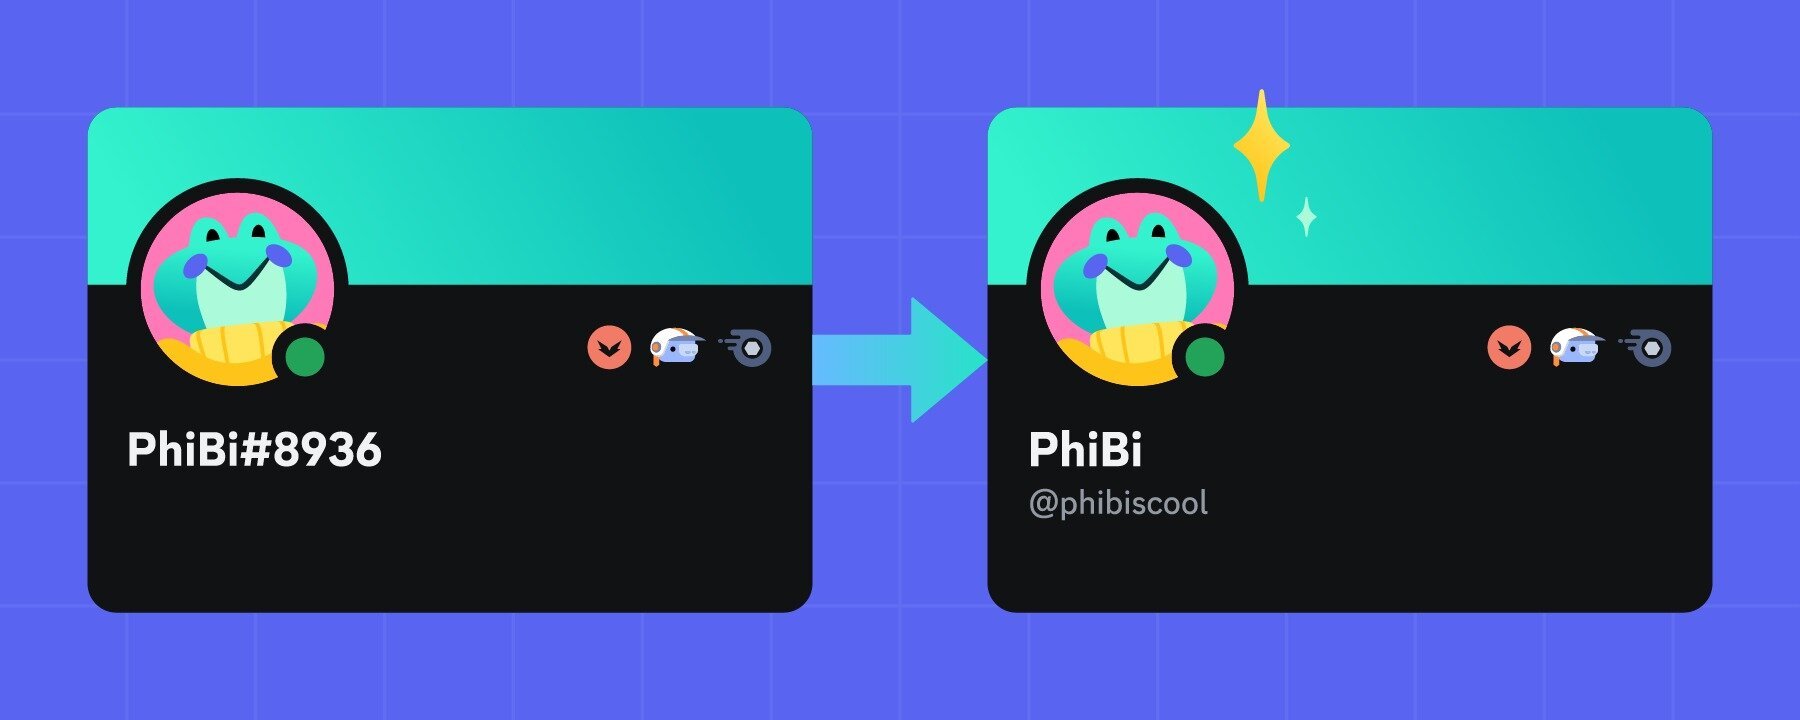 Discord’s new change brings much easier usernames – the internet